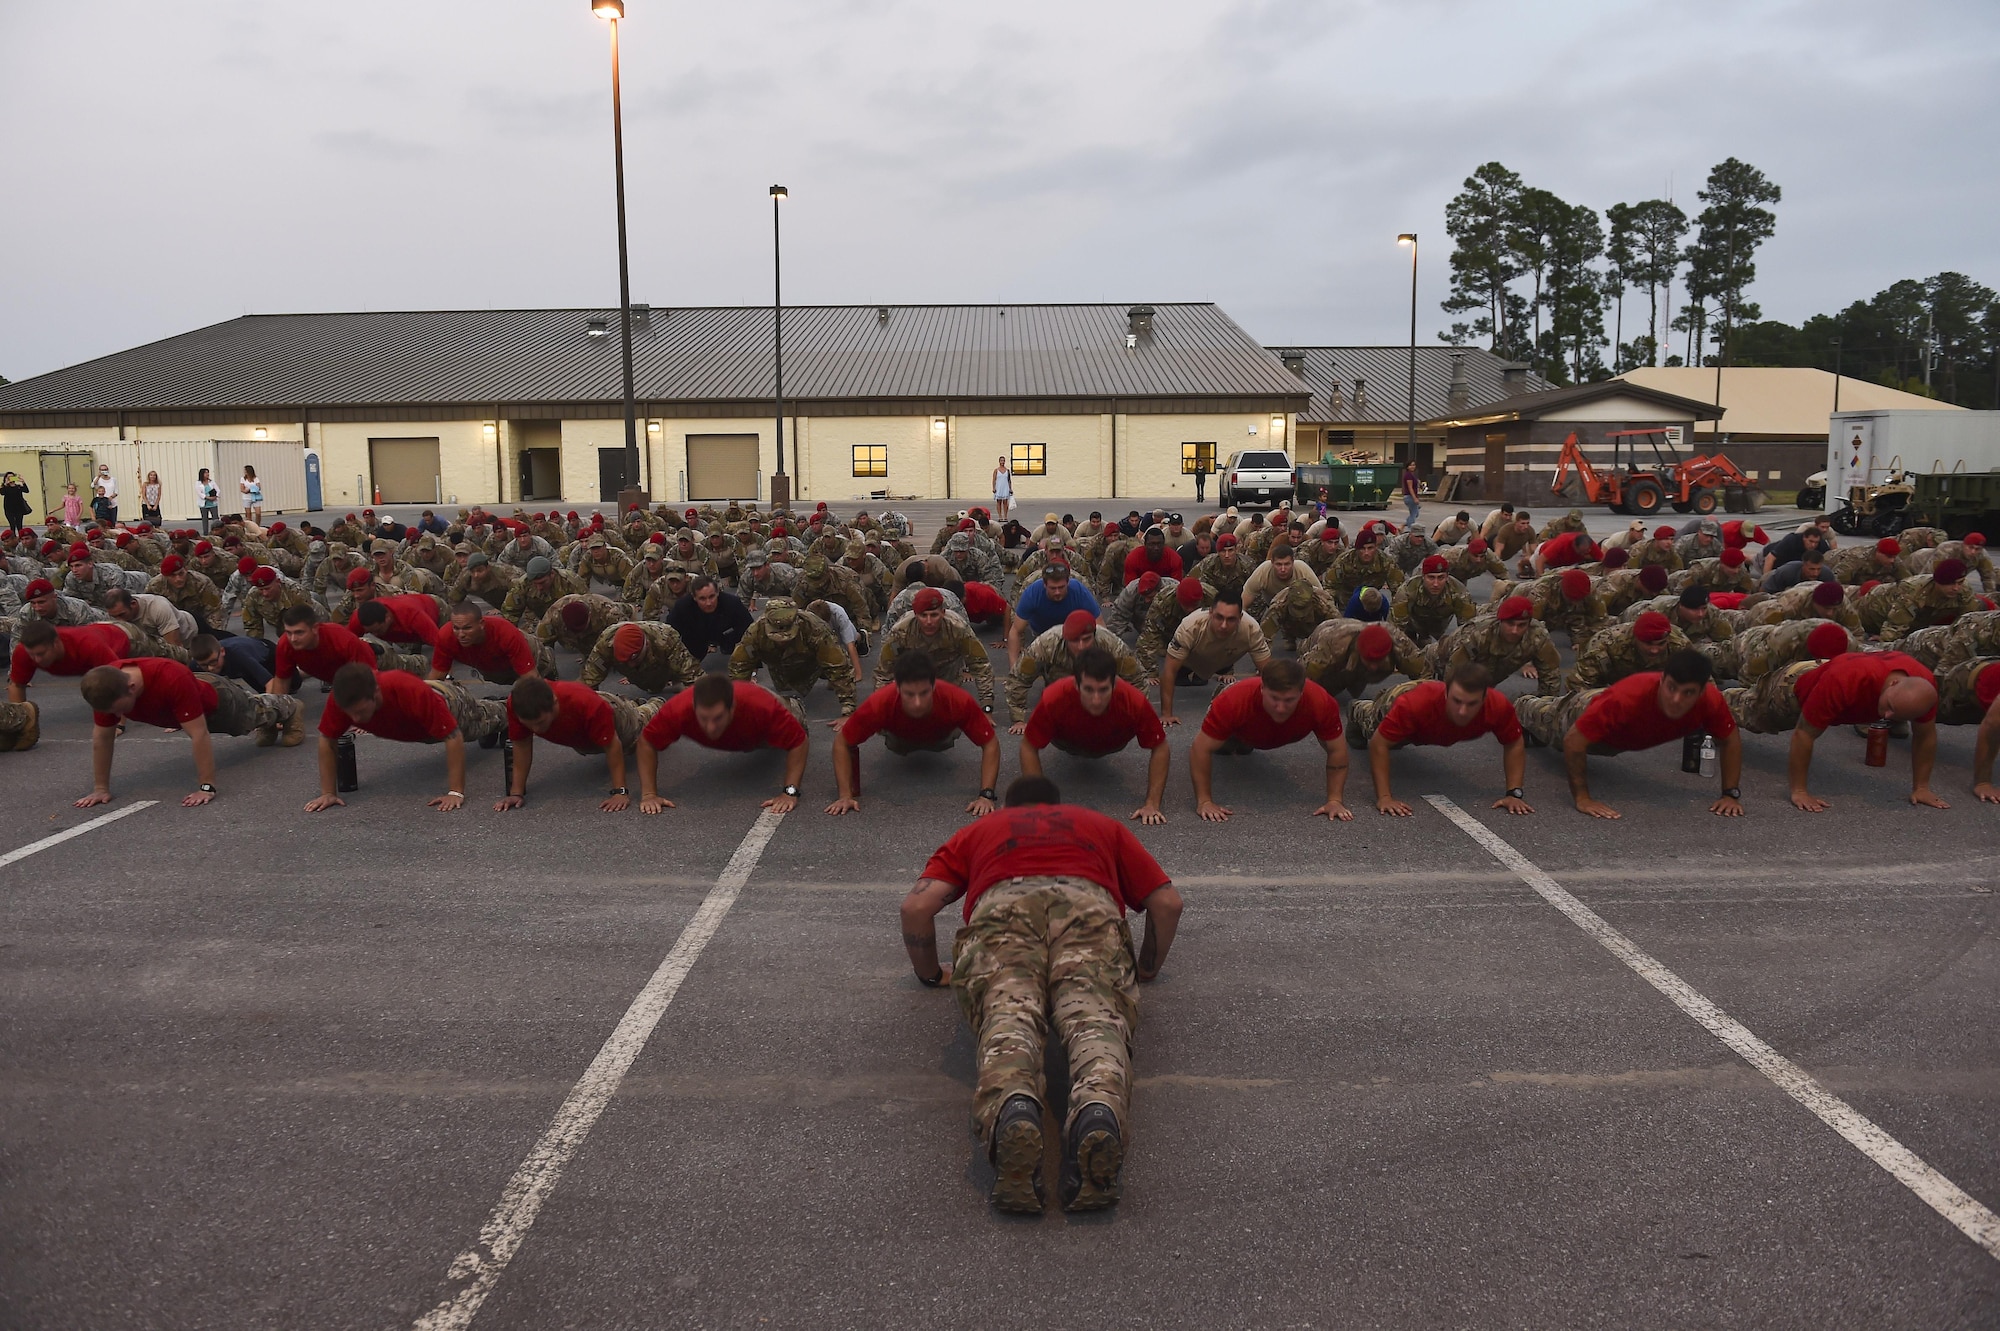 Special Tactics Airmen complete memorial pushups for fallen comrades after finishing an 812-mile memorial march from Texas to Florida. The memorial march is only completed when a Special Tactics Airmen is killed in action. This march was specifically in honor of Capt. Matthew Roland and Staff Sgt. Forrest Sibley, who were killed in action Aug. 26, 2015.